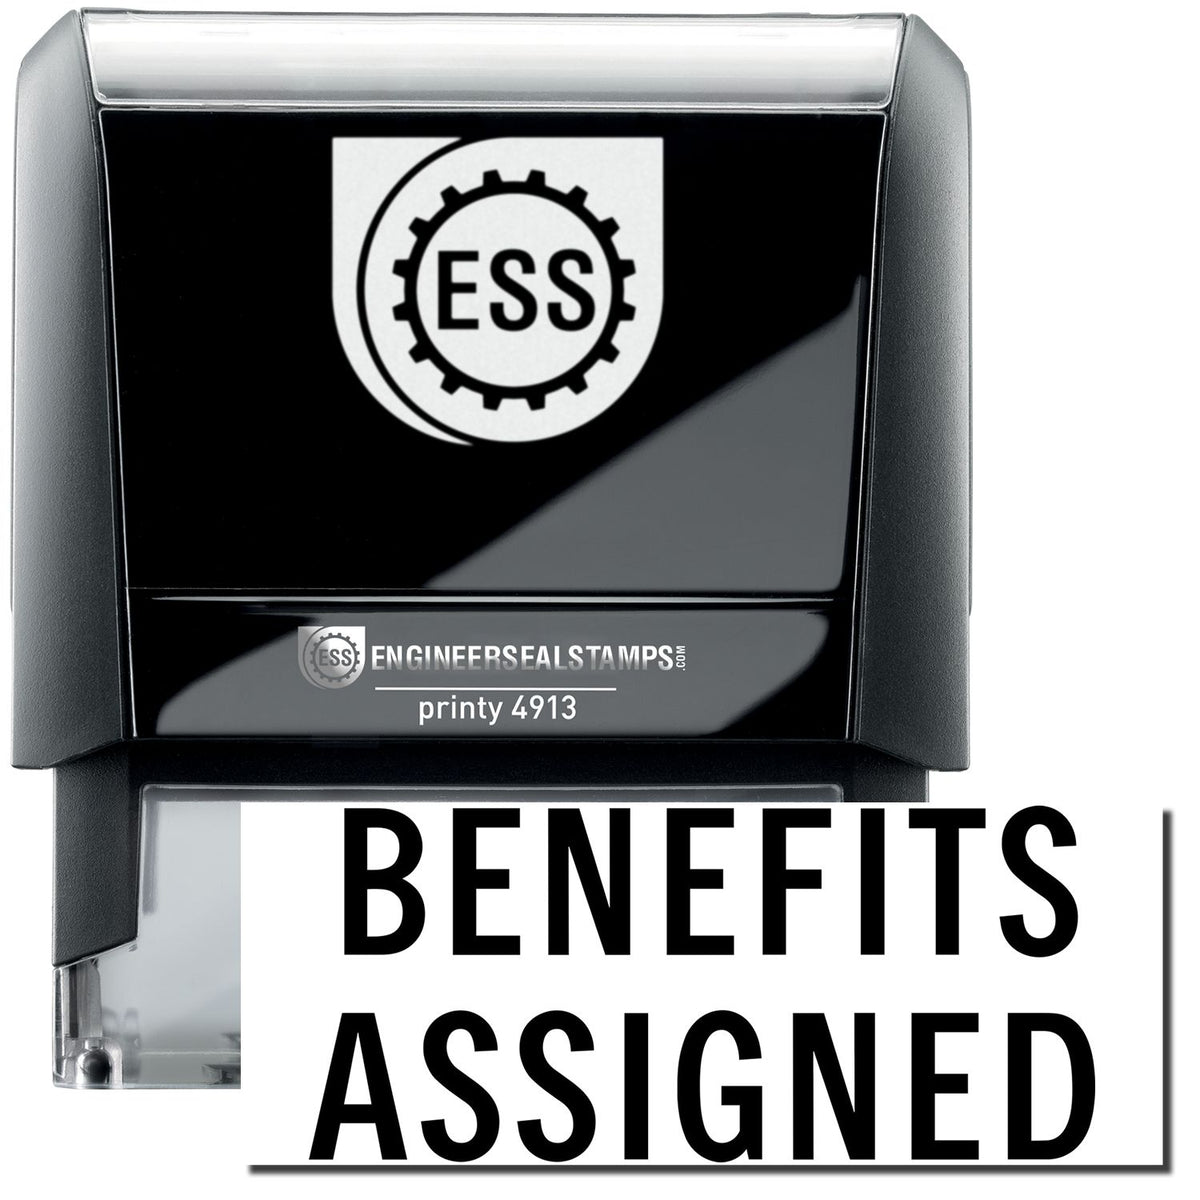 A self-inking stamp with a stamped image showing how the text &quot;BENEFITS ASSIGNED&quot; in a large font is displayed by it after stamping.